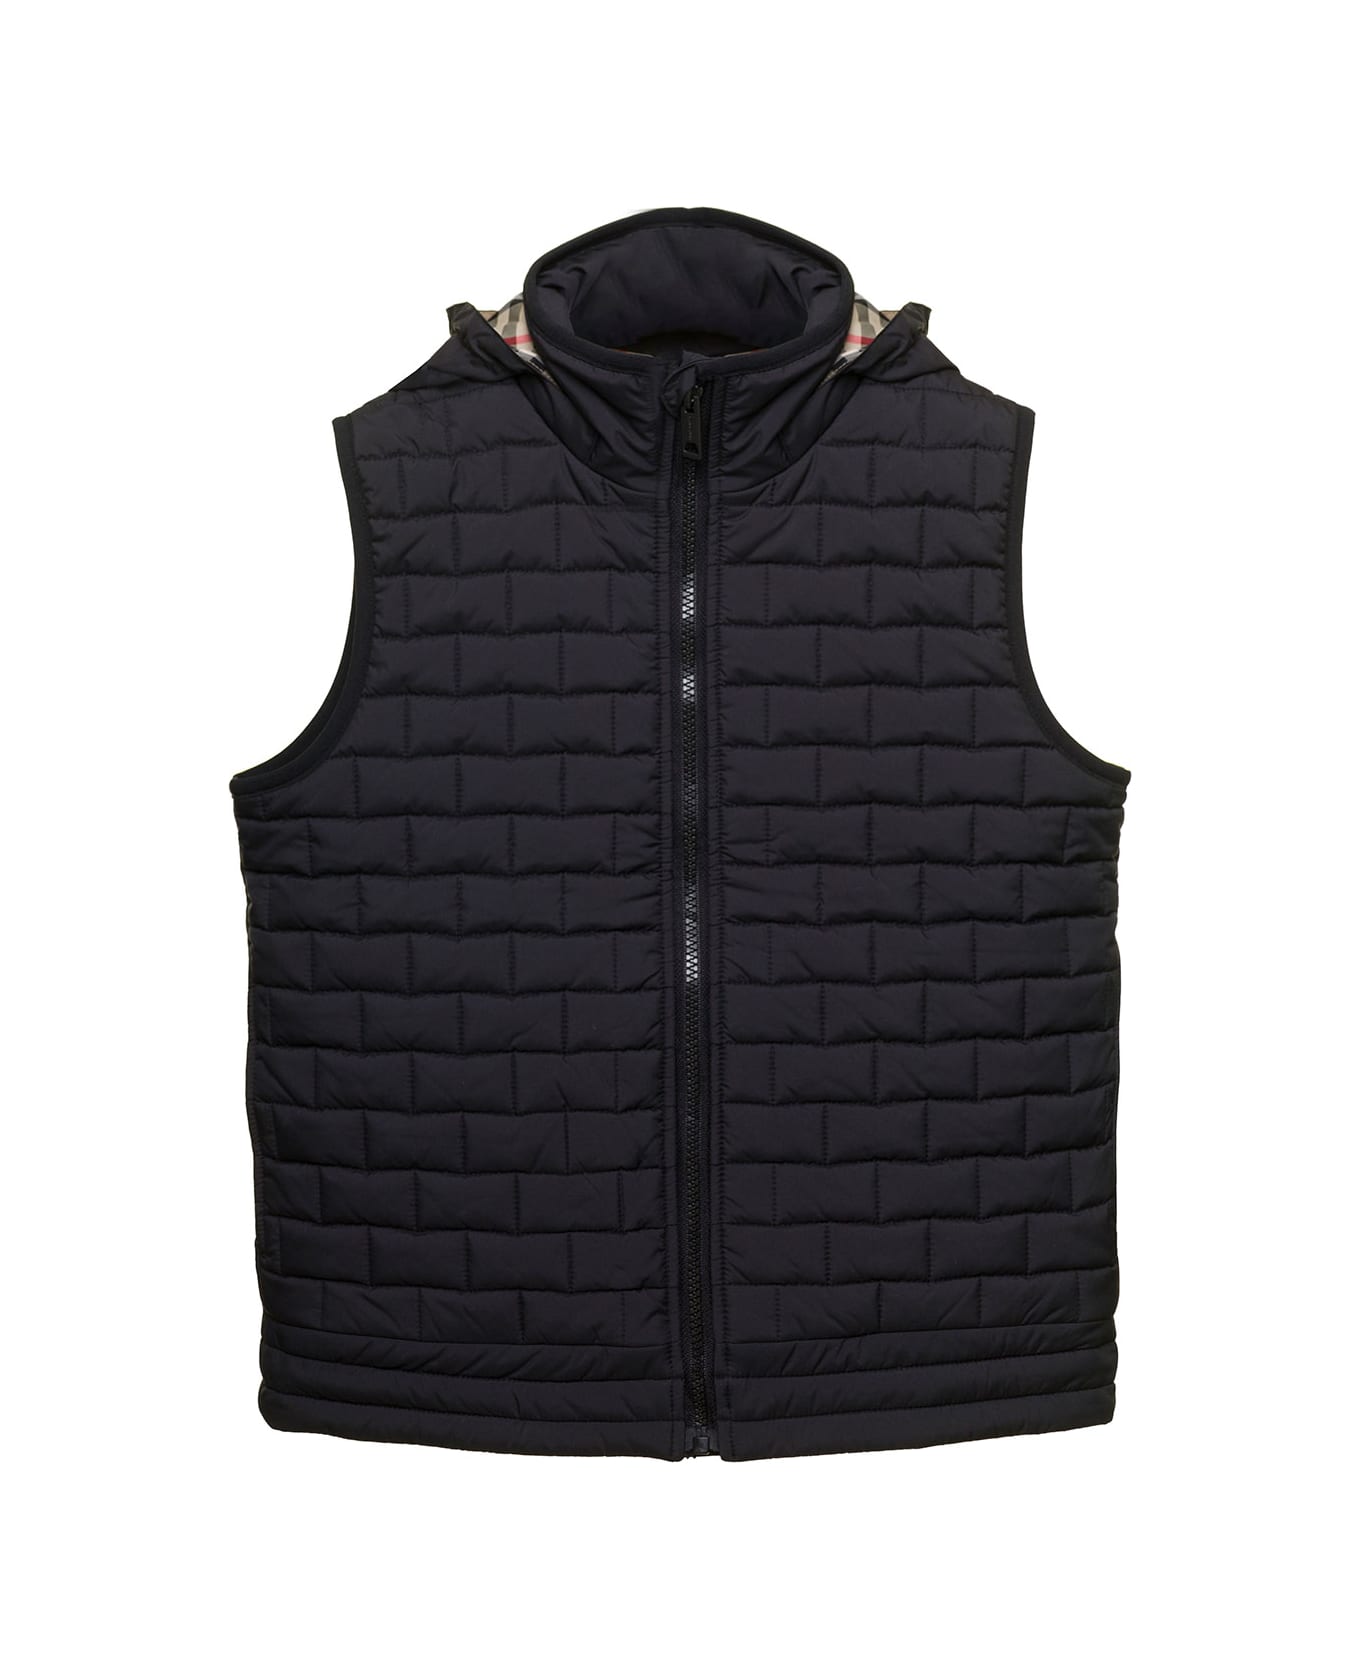 Burberry Black Quilted Hooded Vest With College-style Logo Print In Nylon Boy - Black コート＆ジャケット